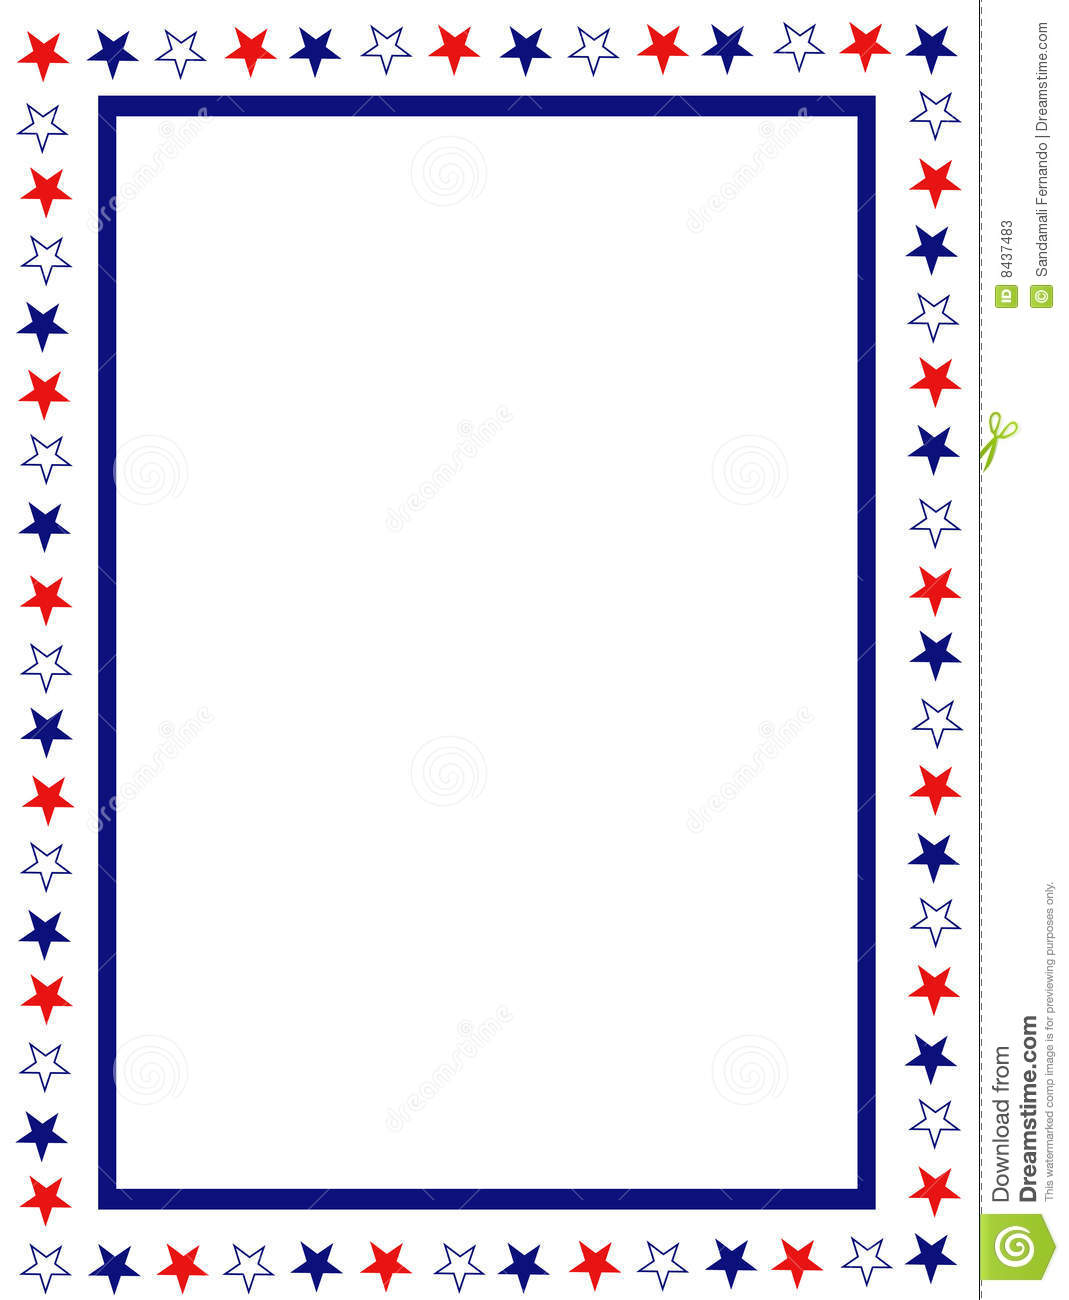 Free Png Frames And Page Borders - Free Patriotic Page Borders | Blue And Red Patriotic Stars Stripes Page Border Frame Design, Transparent background PNG HD thumbnail